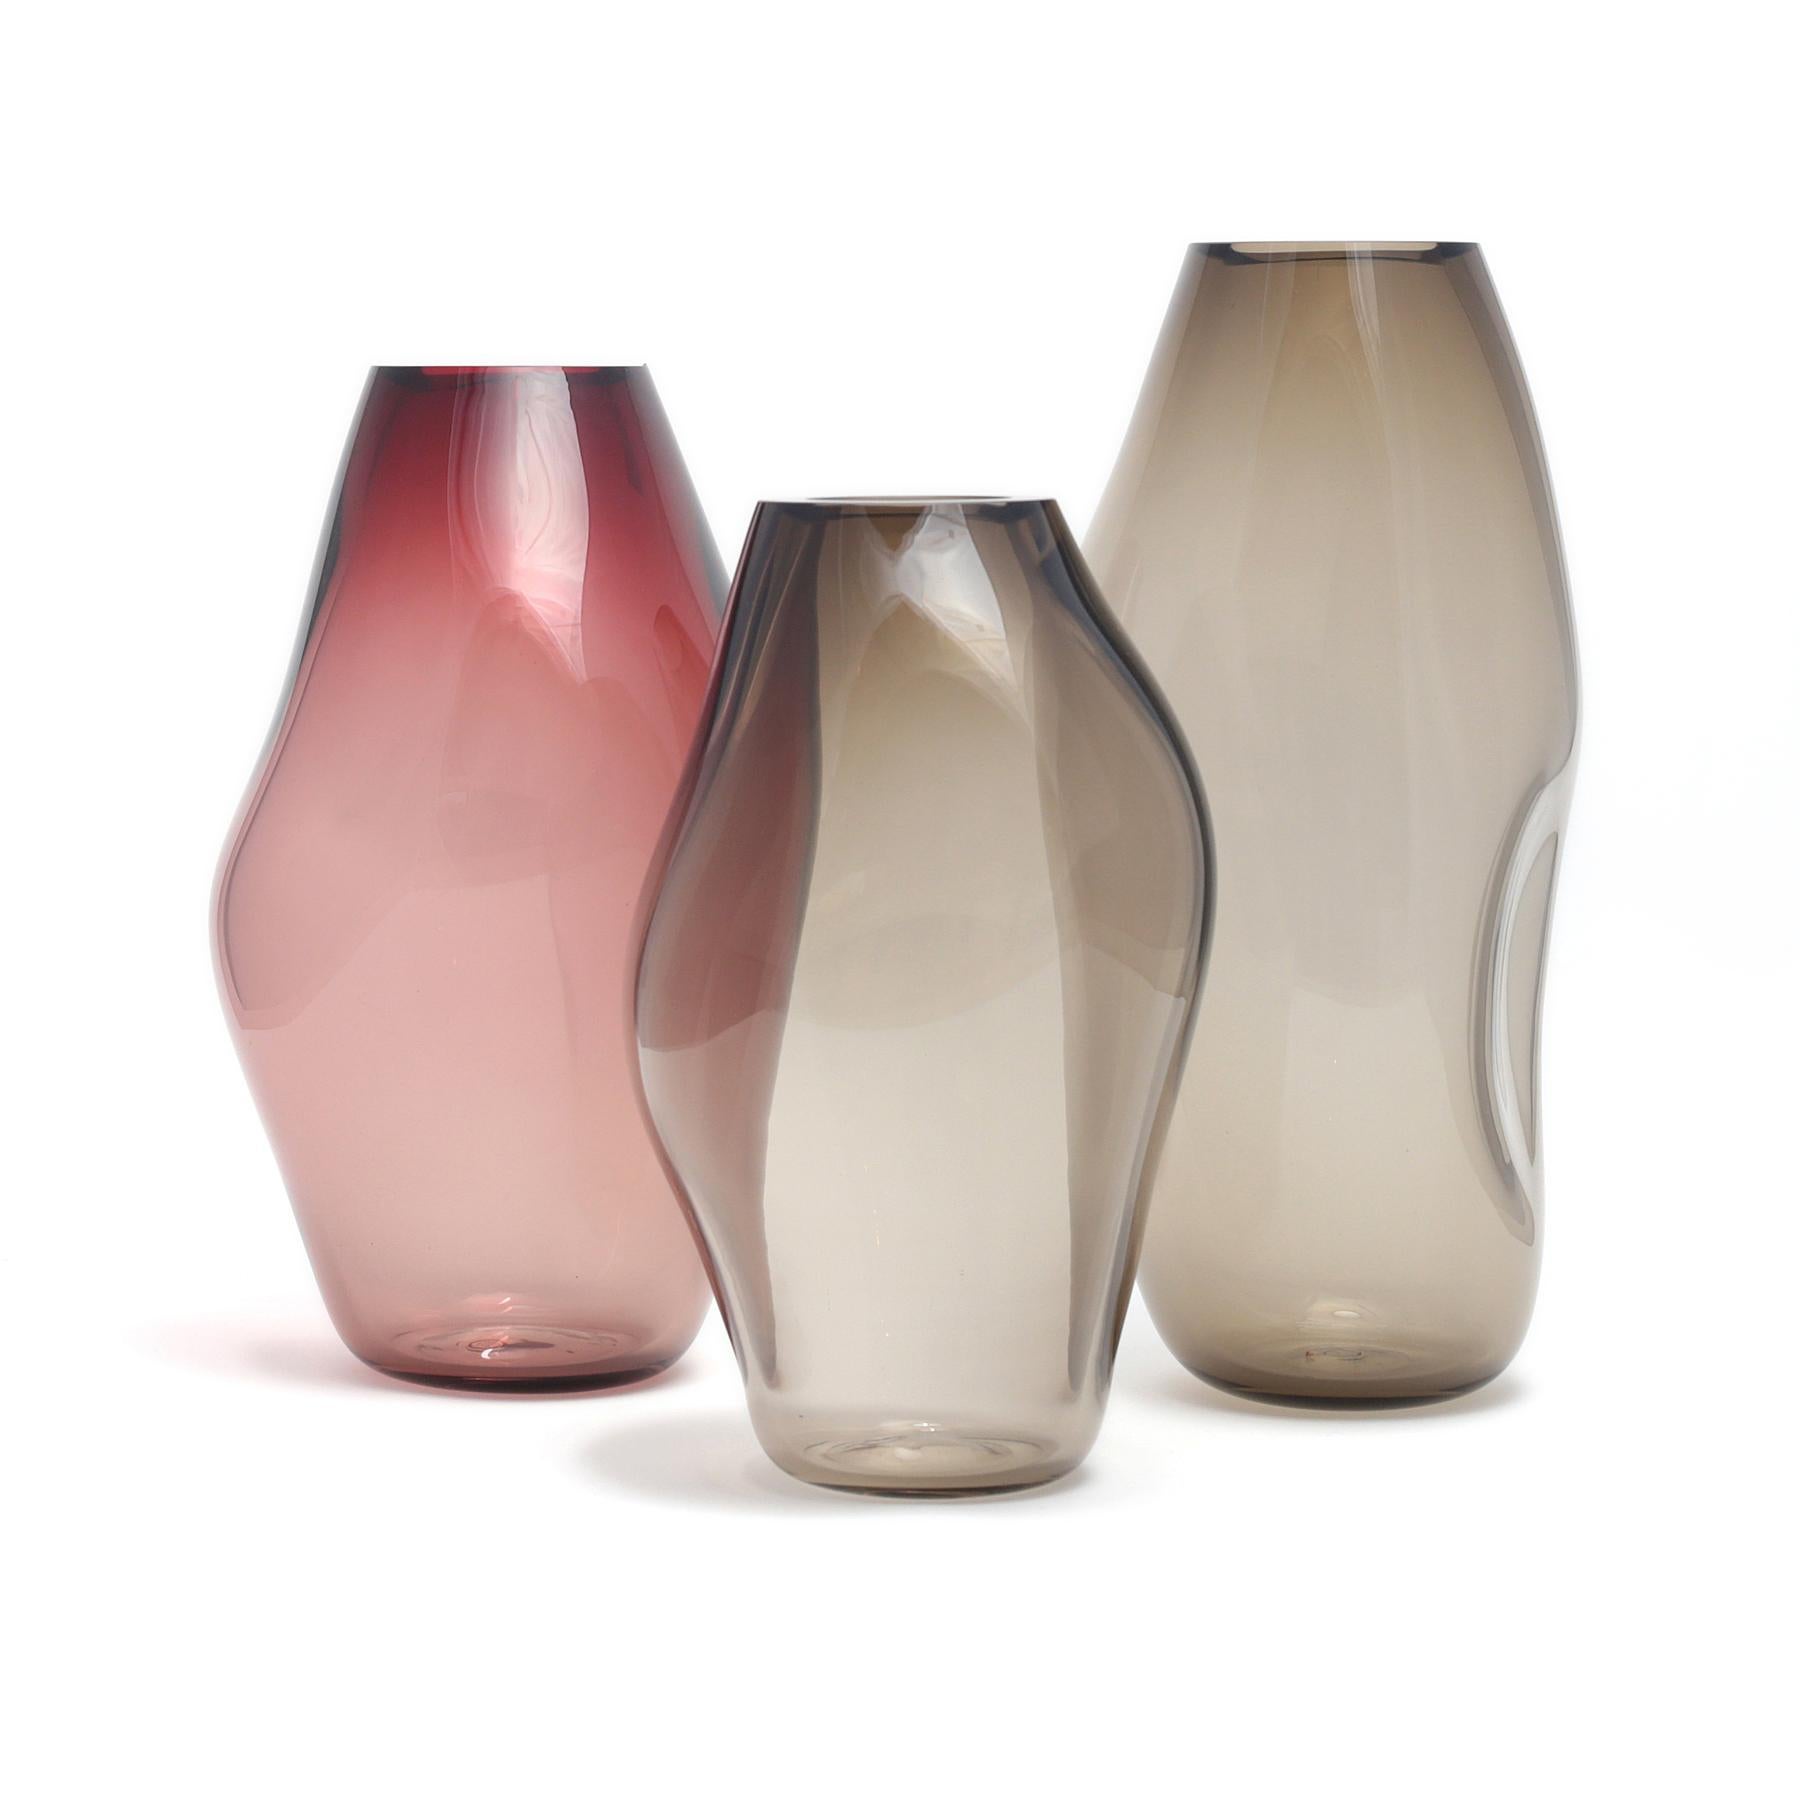 Set of 3 Supernova IV L/M/ XL vases by ELOA
No UL listed 
Material: glass
Dimensions: D 15 x W 17 x H 41 cm/ D 15 x W 17 x H 36 cm/ D 16 x W 18 x H 49 cm
Also available in different colours and dimensions

SUPERNOVA is a collection of vases and